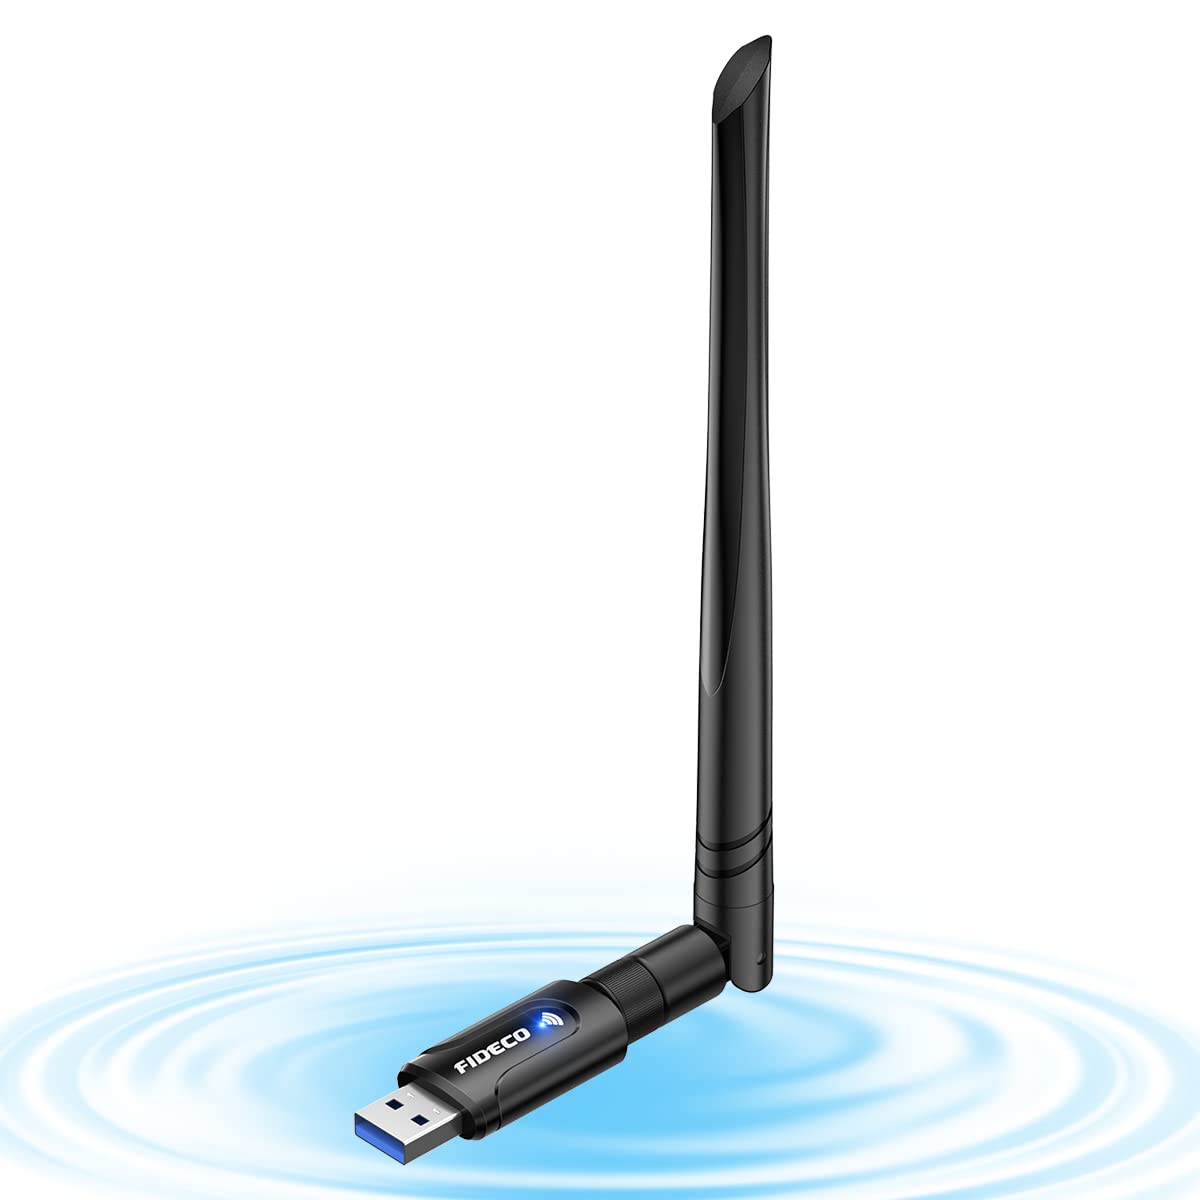 FIDECO WiFi Adapter - AC1200 Dual Band (5.8G/Max 867Mbps & 2.4G/Max 300Mbps), WiFi Dongle with 5dBi High Gain Antenna, USB 3.0 WiFi Adapter for Desktop/Laptop, Support Windows, Mac Os X 10.6-10.15